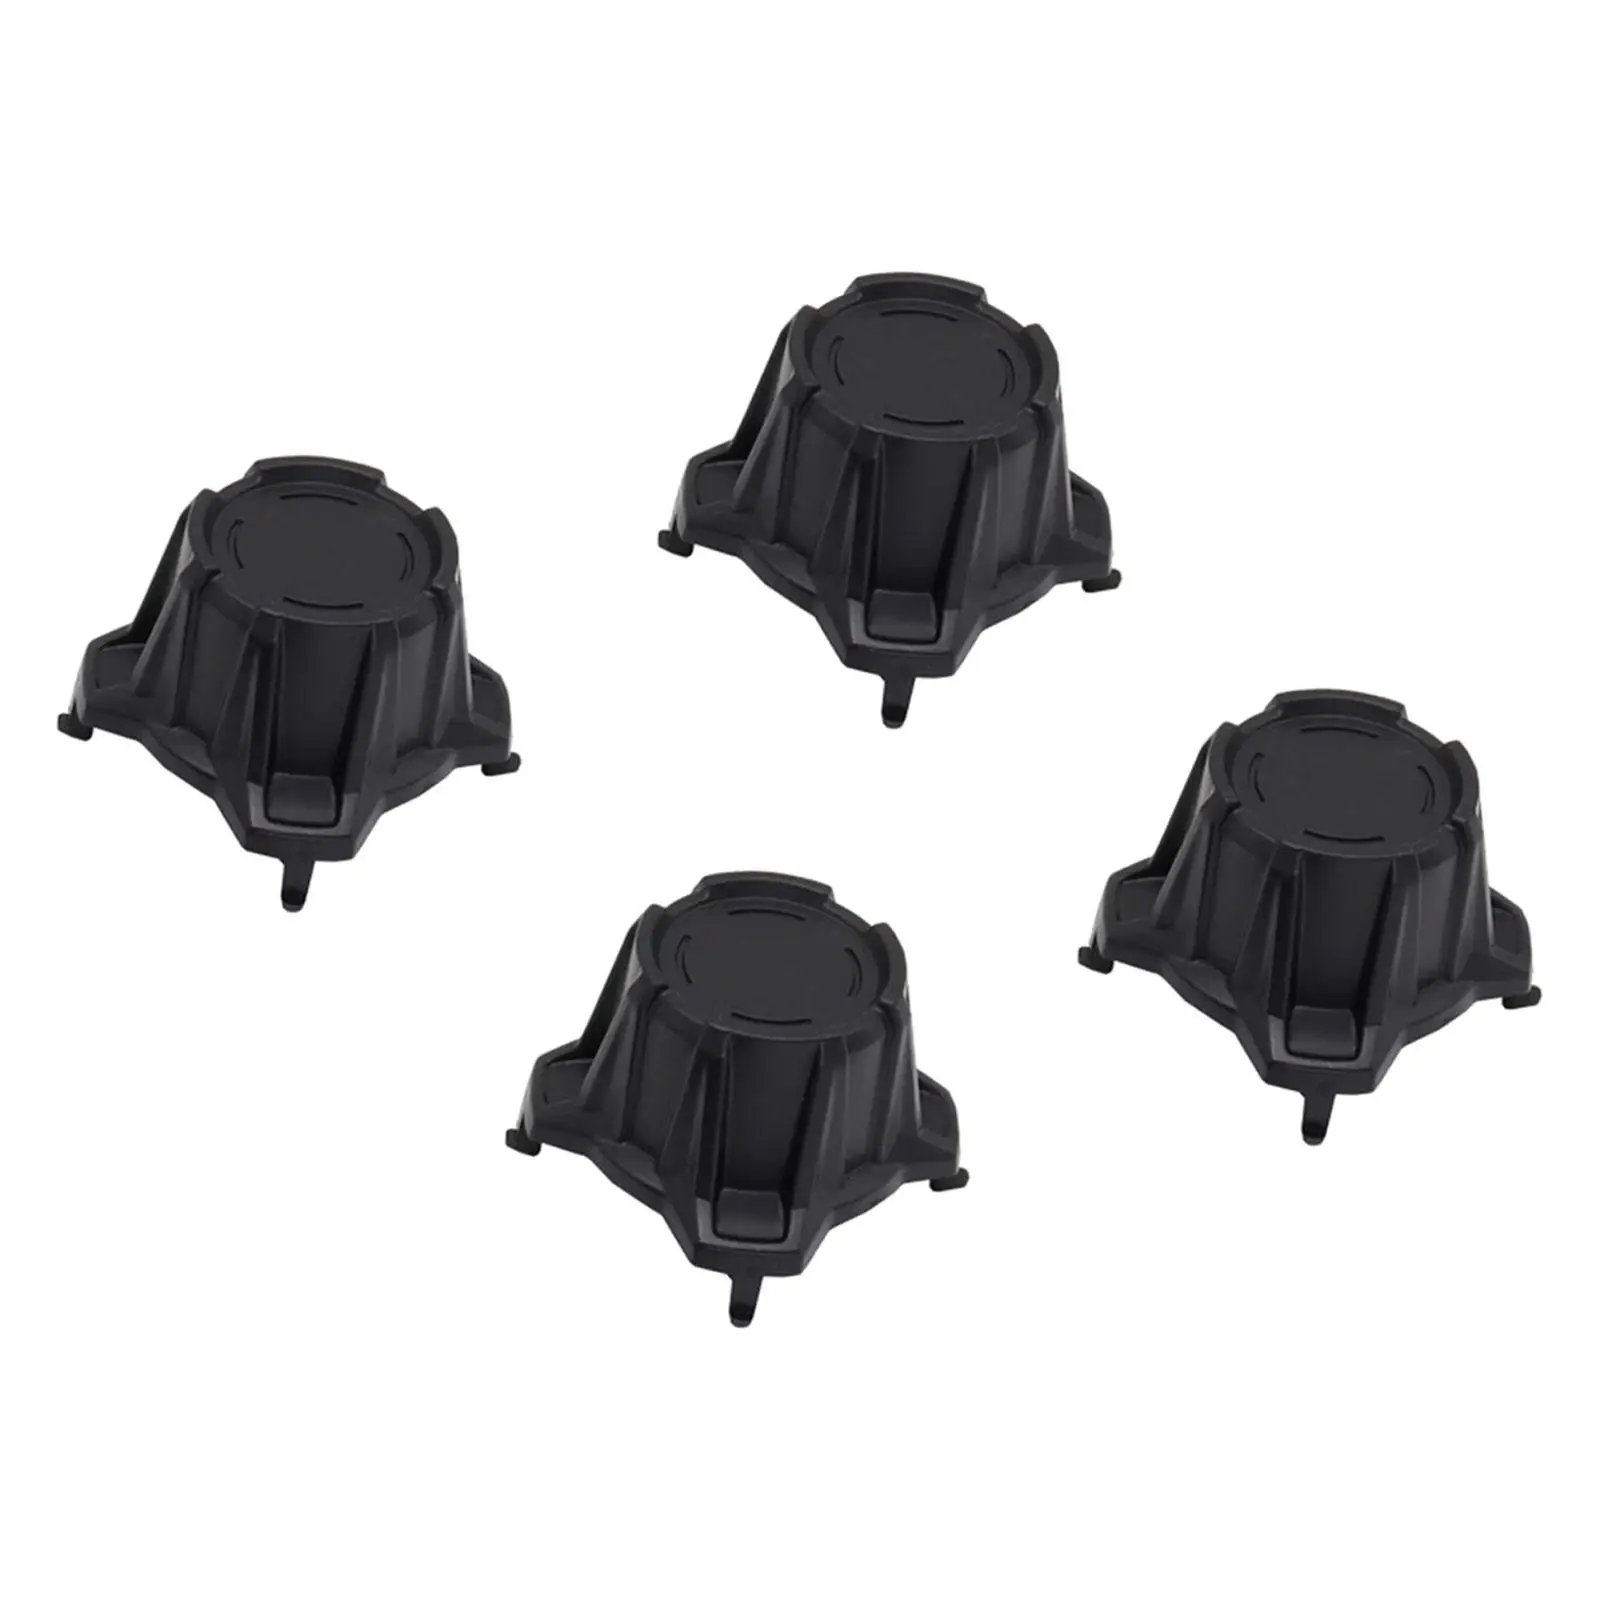 4x Tire Wheel Hub Caps Motorcycle Easy to Install Repair Parts Cap Cover for x3